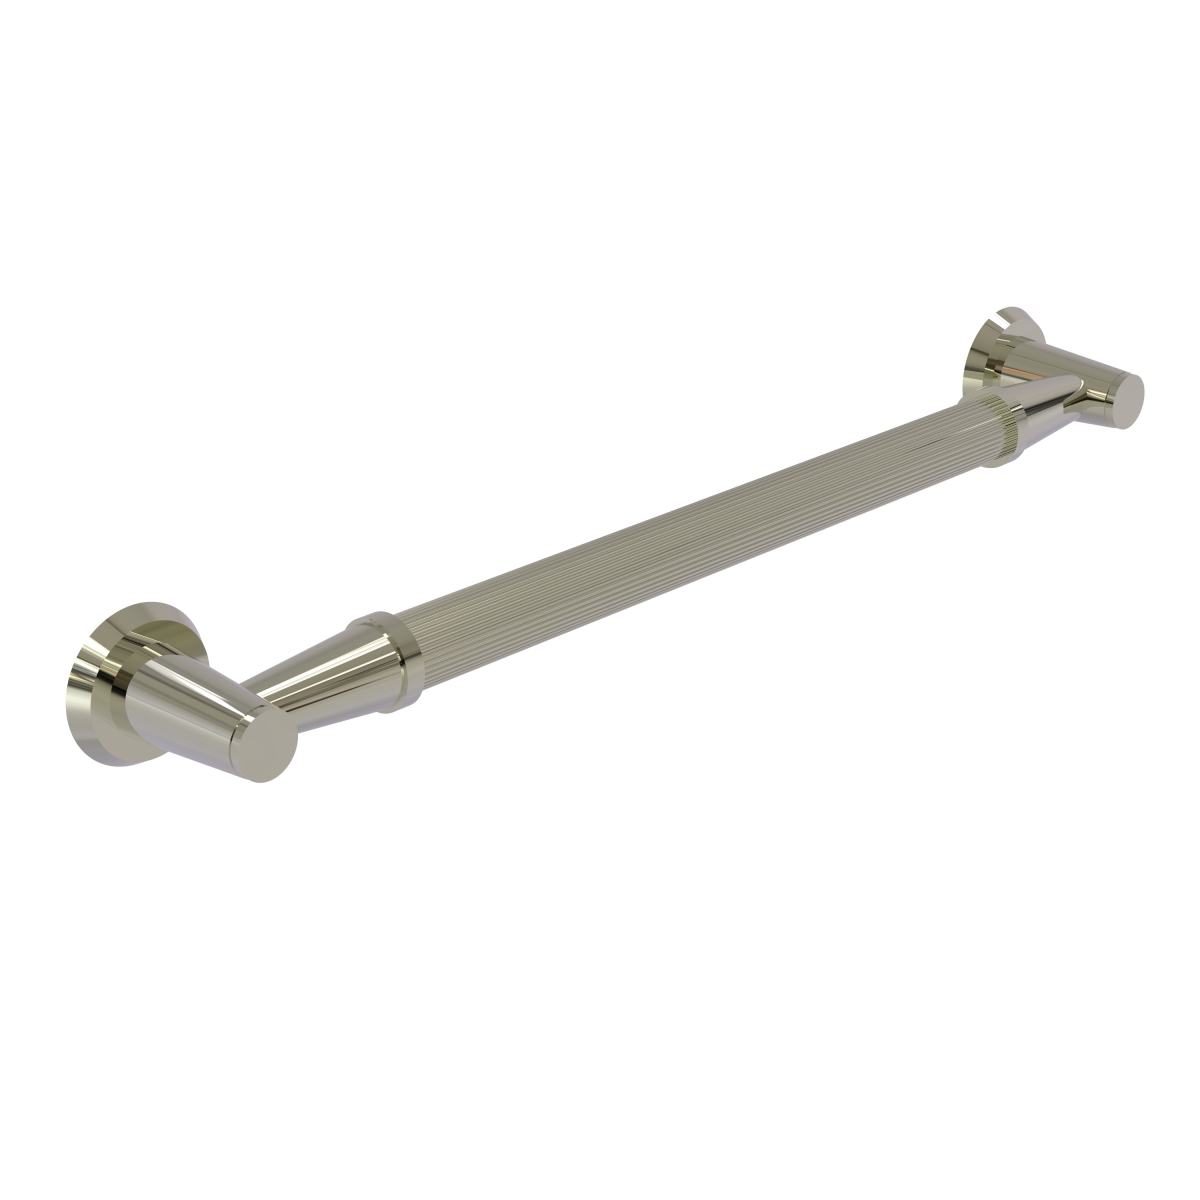 Picture of Allied Brass MD-GRR-16-PNI 16 in. Reeded Grab Bar, Polished Nickel - 3.5 x 18 x 16 in.